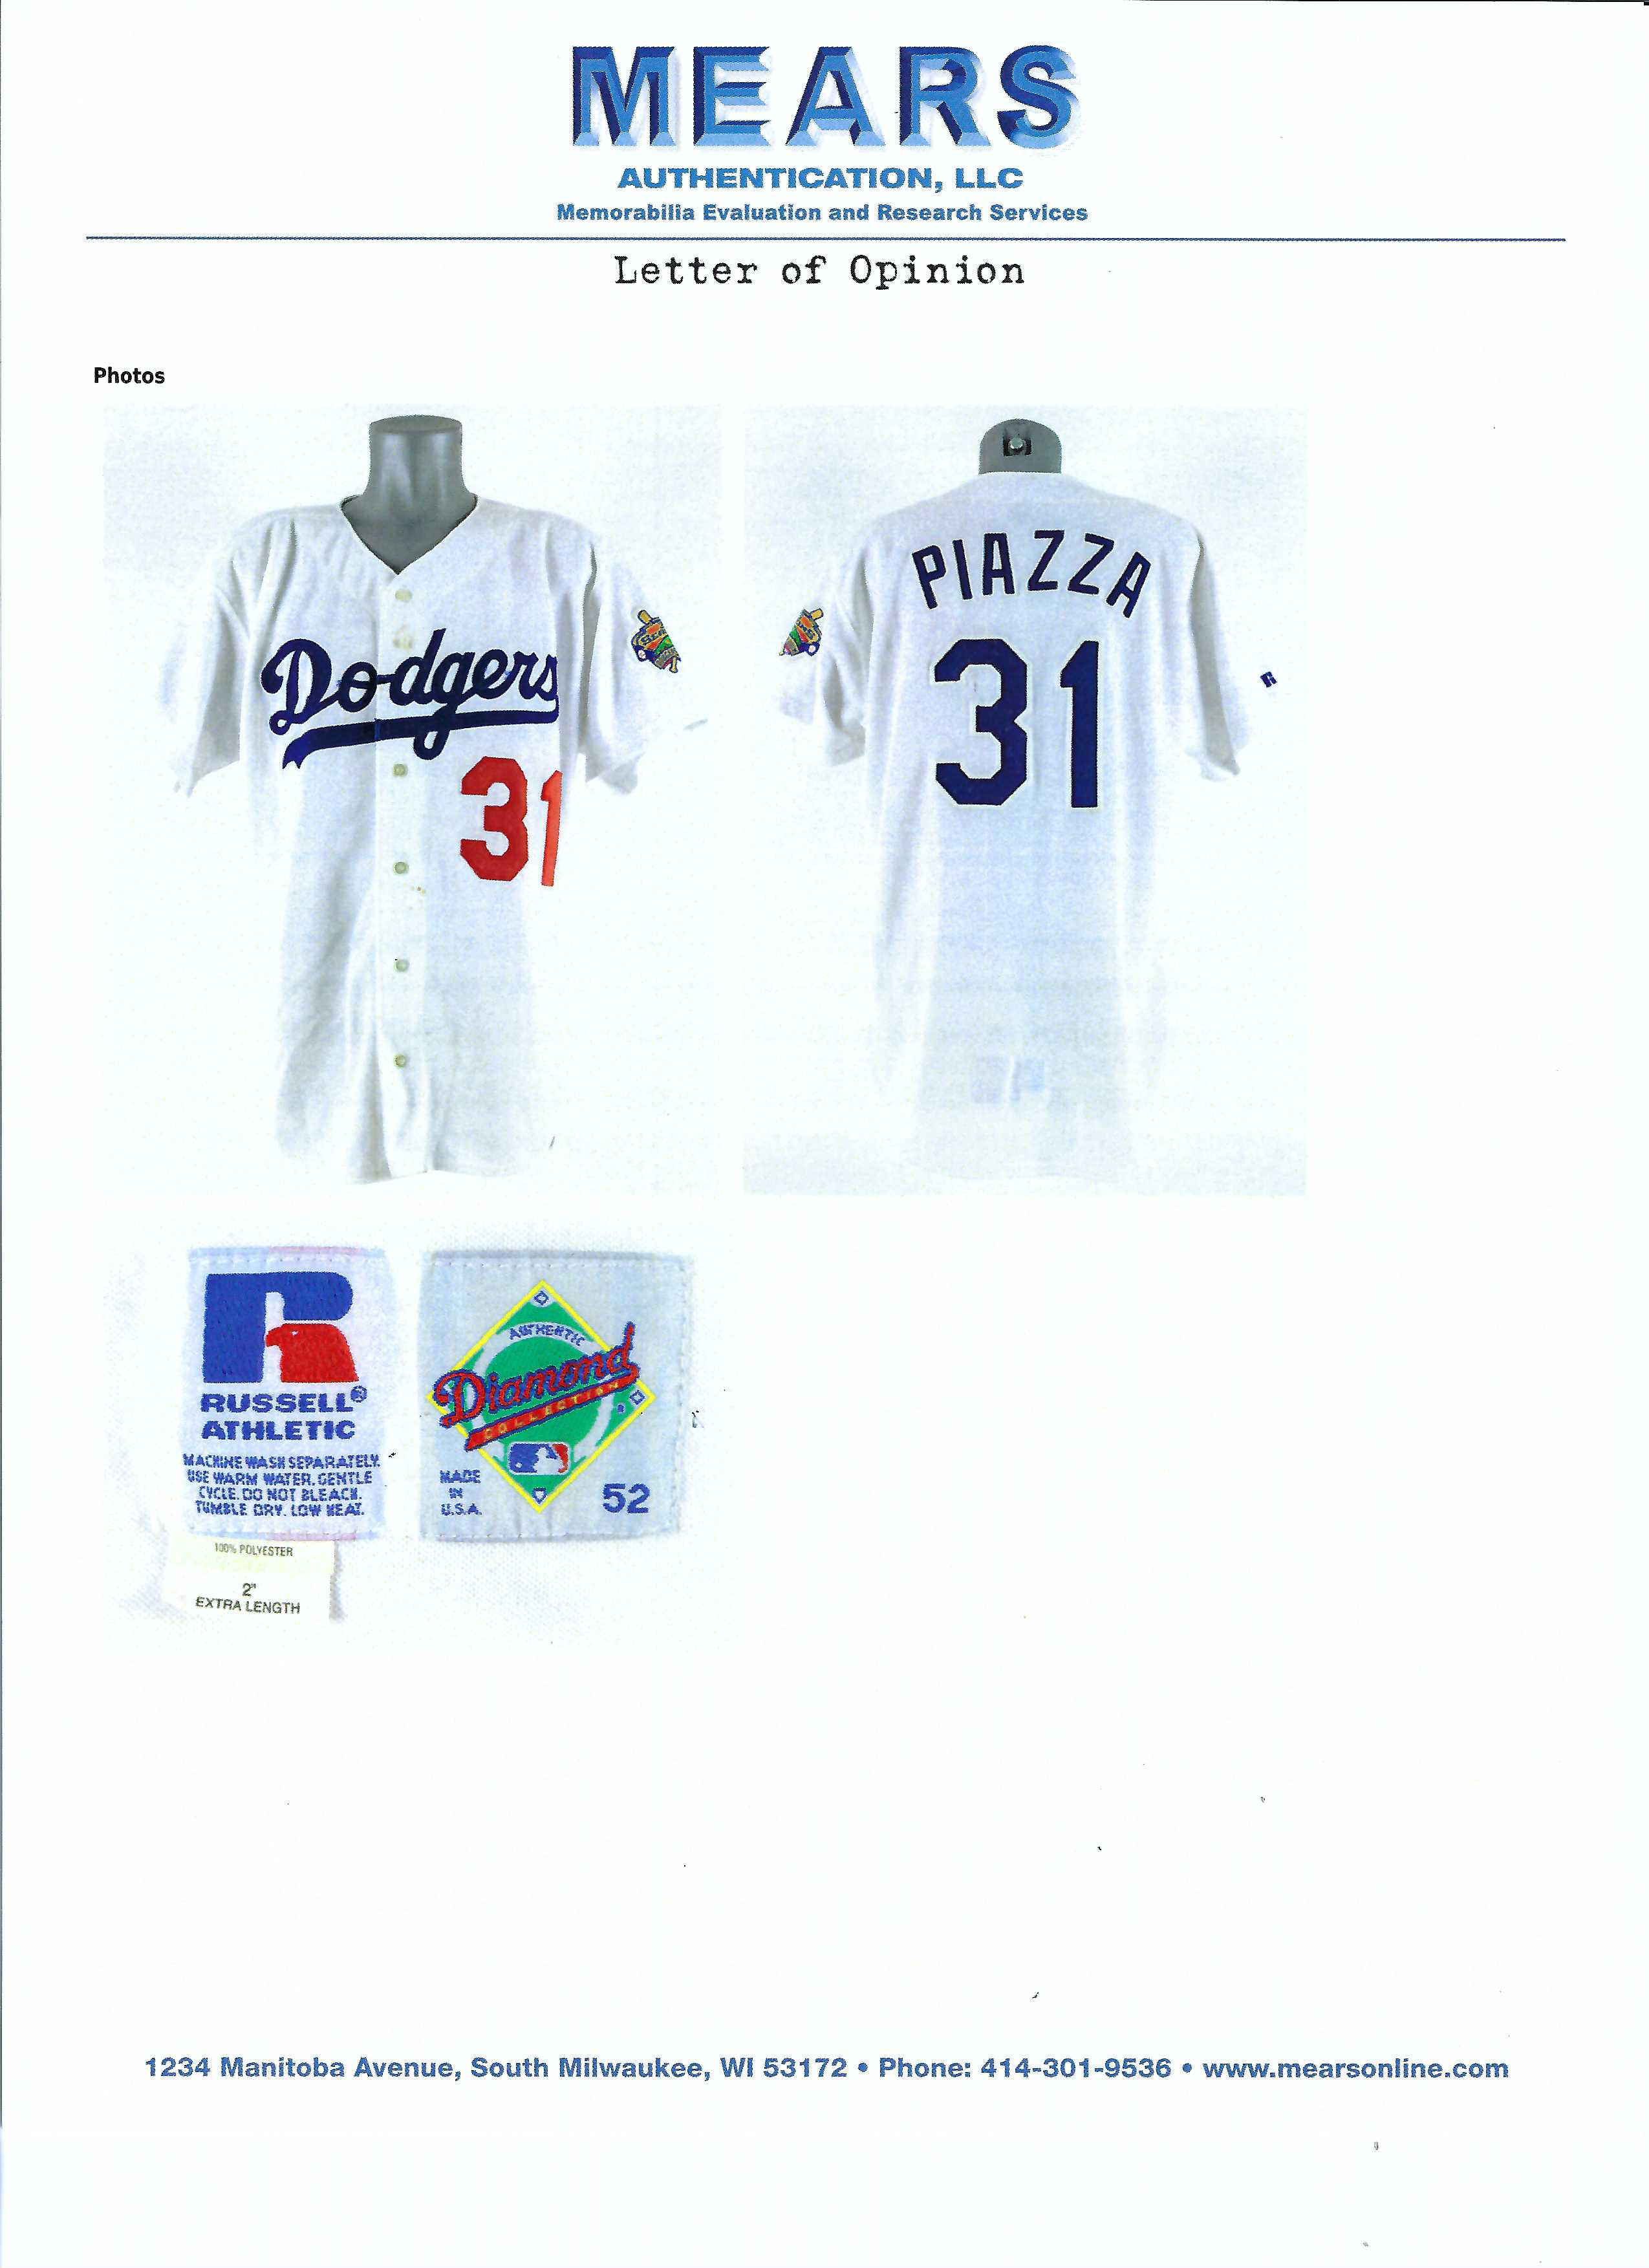 Mike Piazza 1996 Game-Used Dodgers Jersey (Grey Flannel